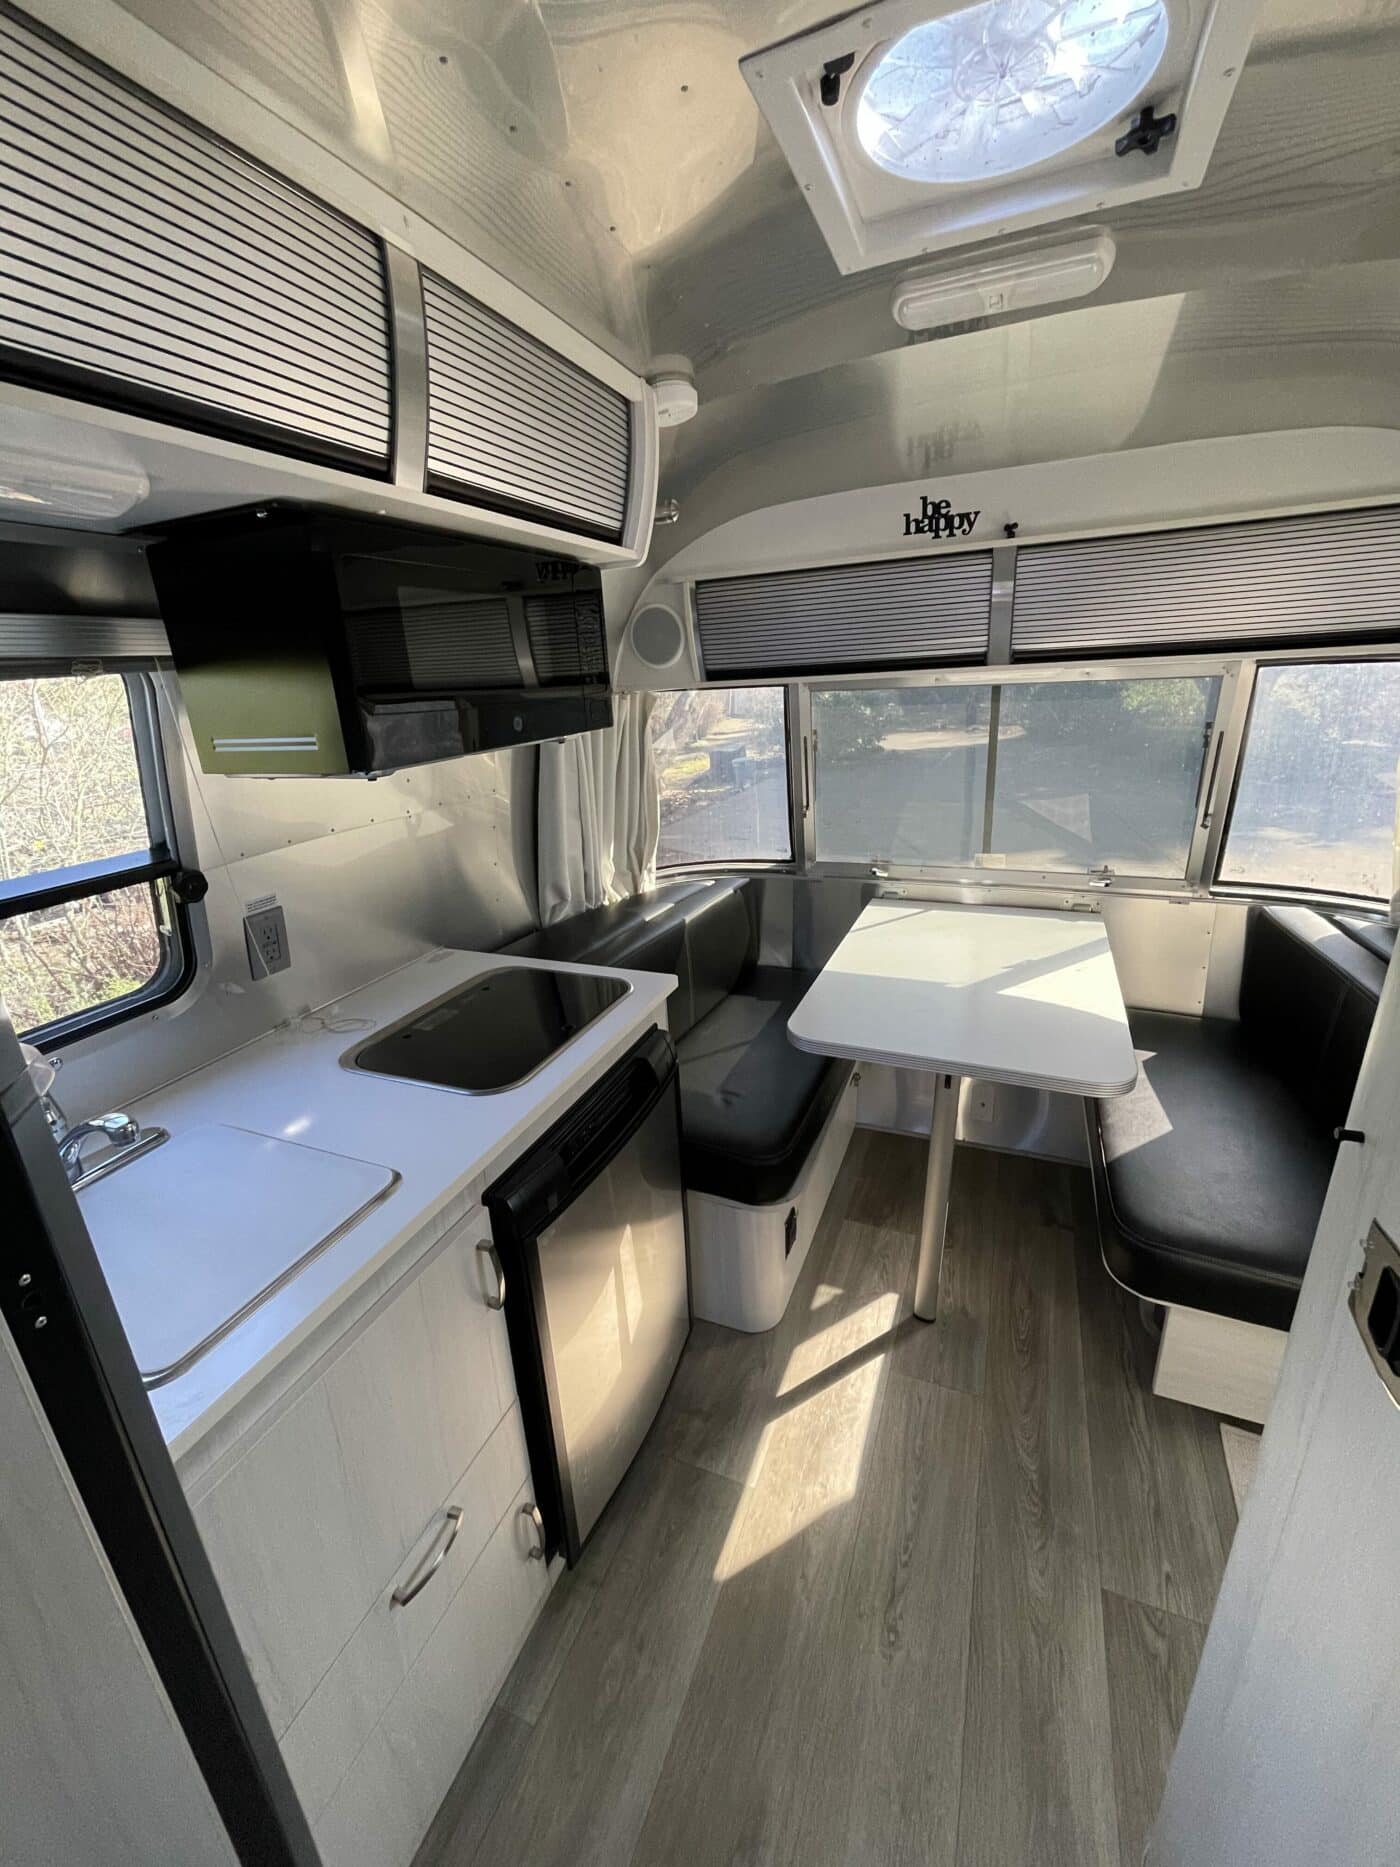 2017 16FT Bambi For Sale In Eugene, Oregon - Airstream Marketplace